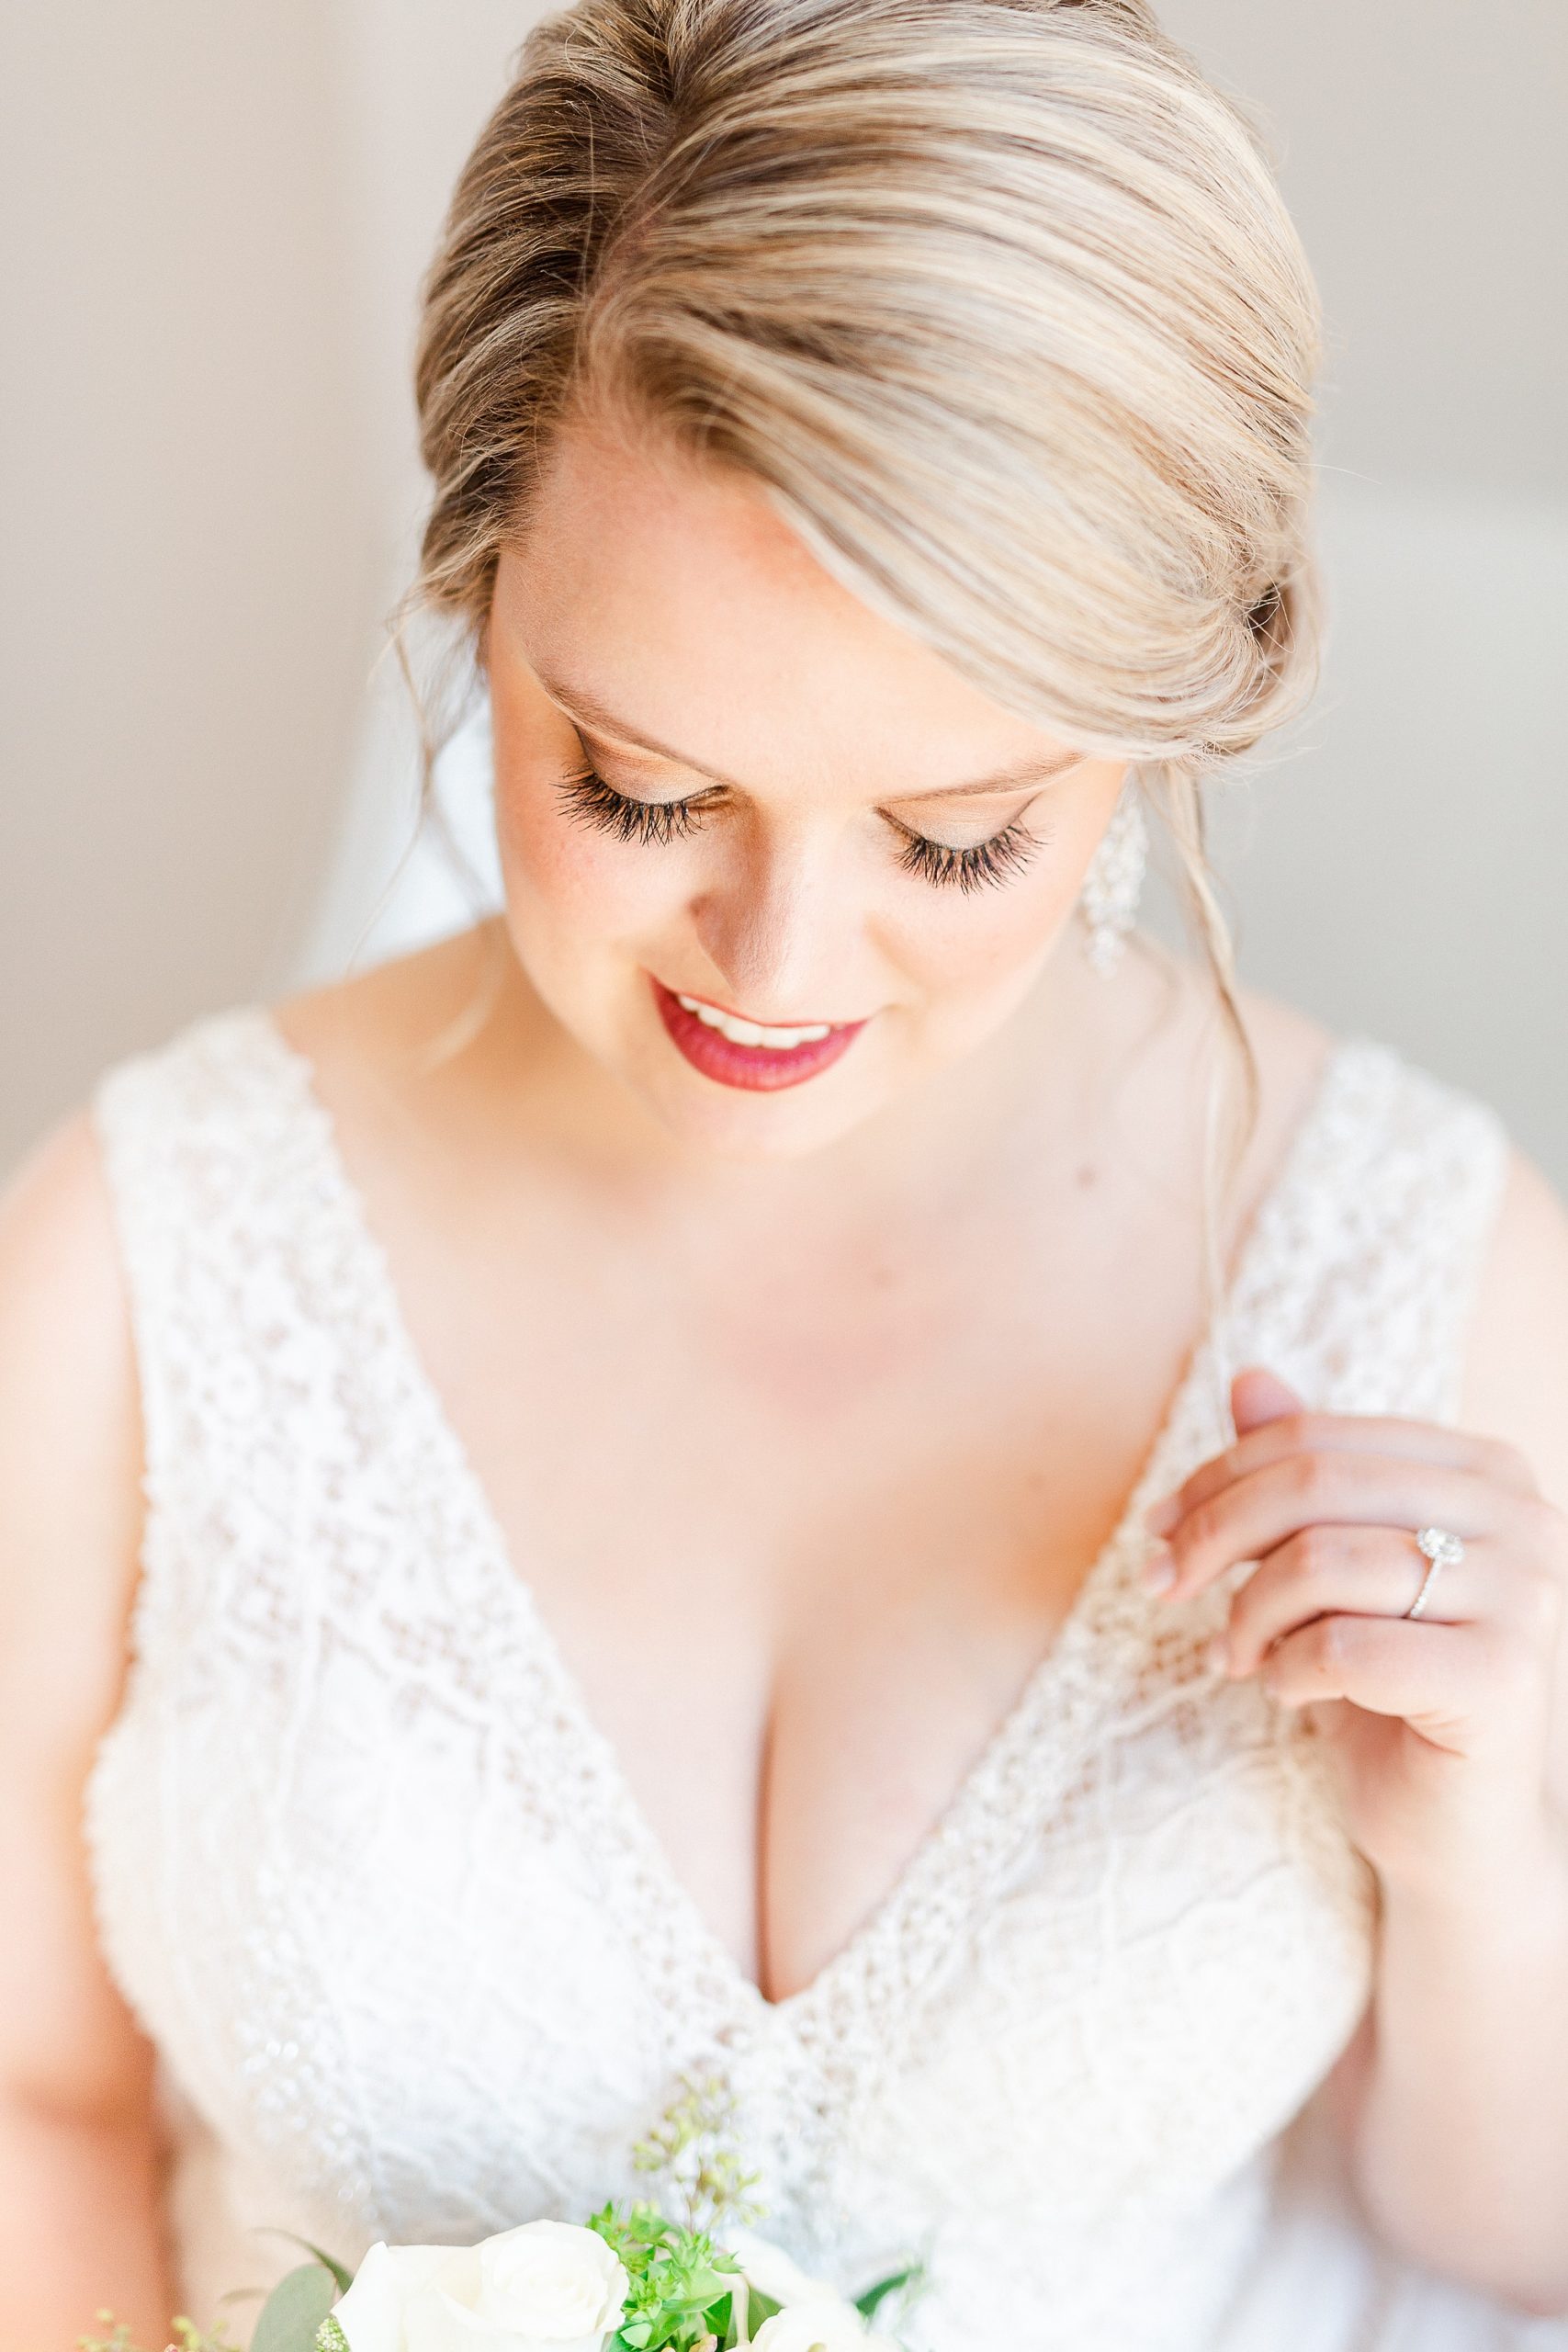 bride holds strand of hair during bridal portraits